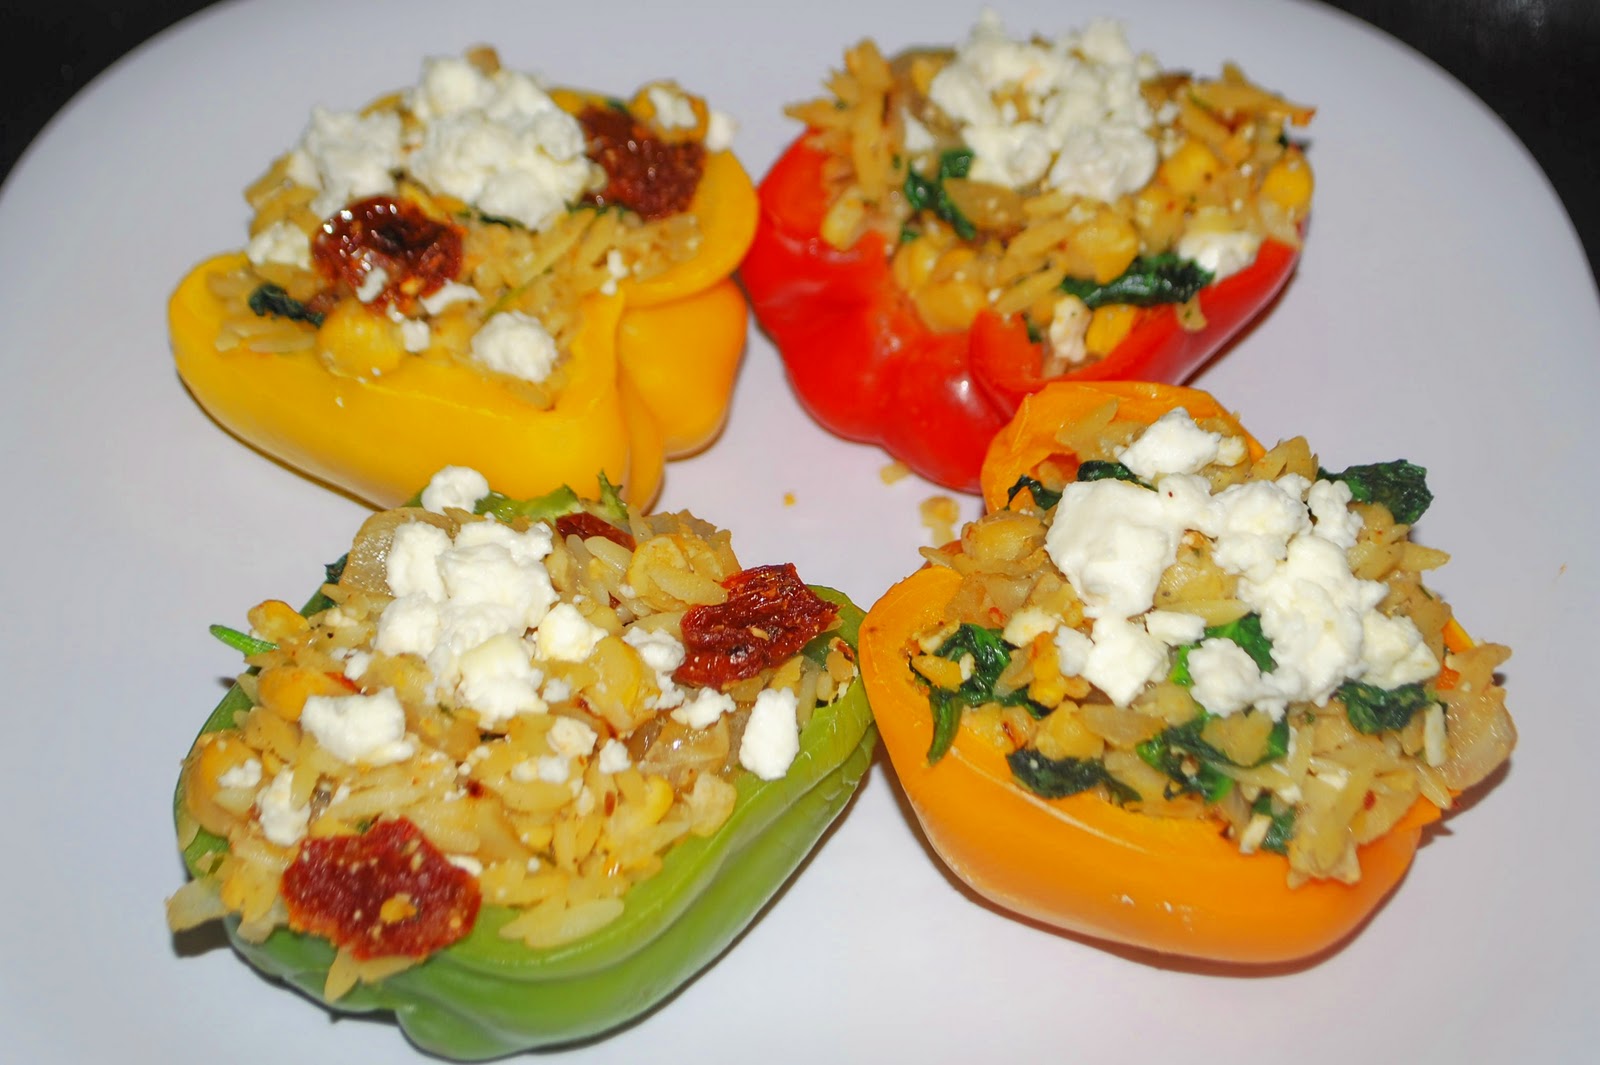 My {Valuable, but Small} Life: Greek Orzo Stuffed Peppers